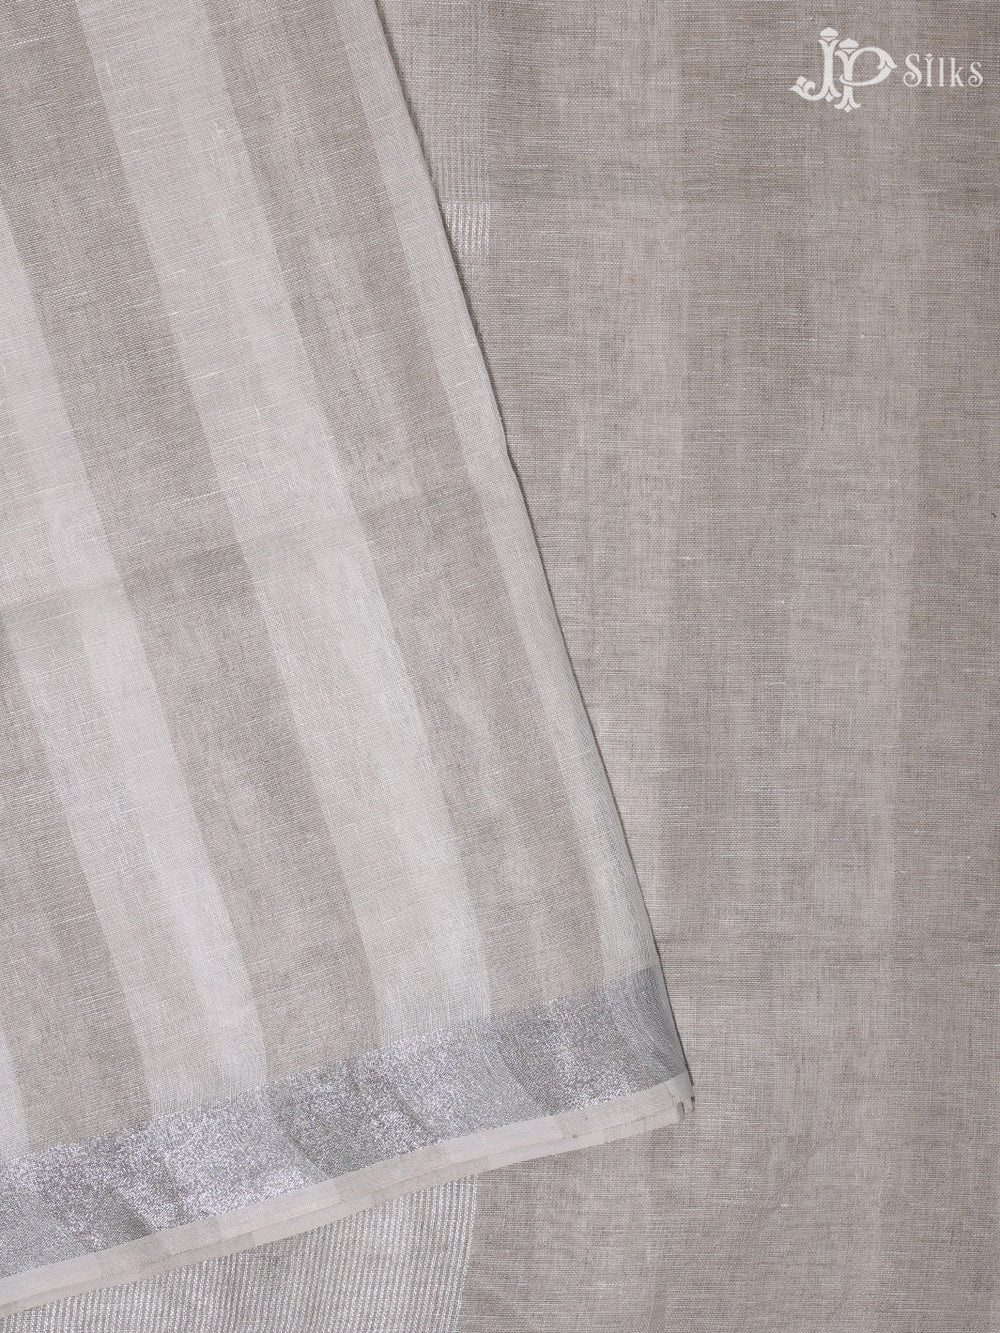 White and Grey Linen Fancy Saree - E4558 - View 1